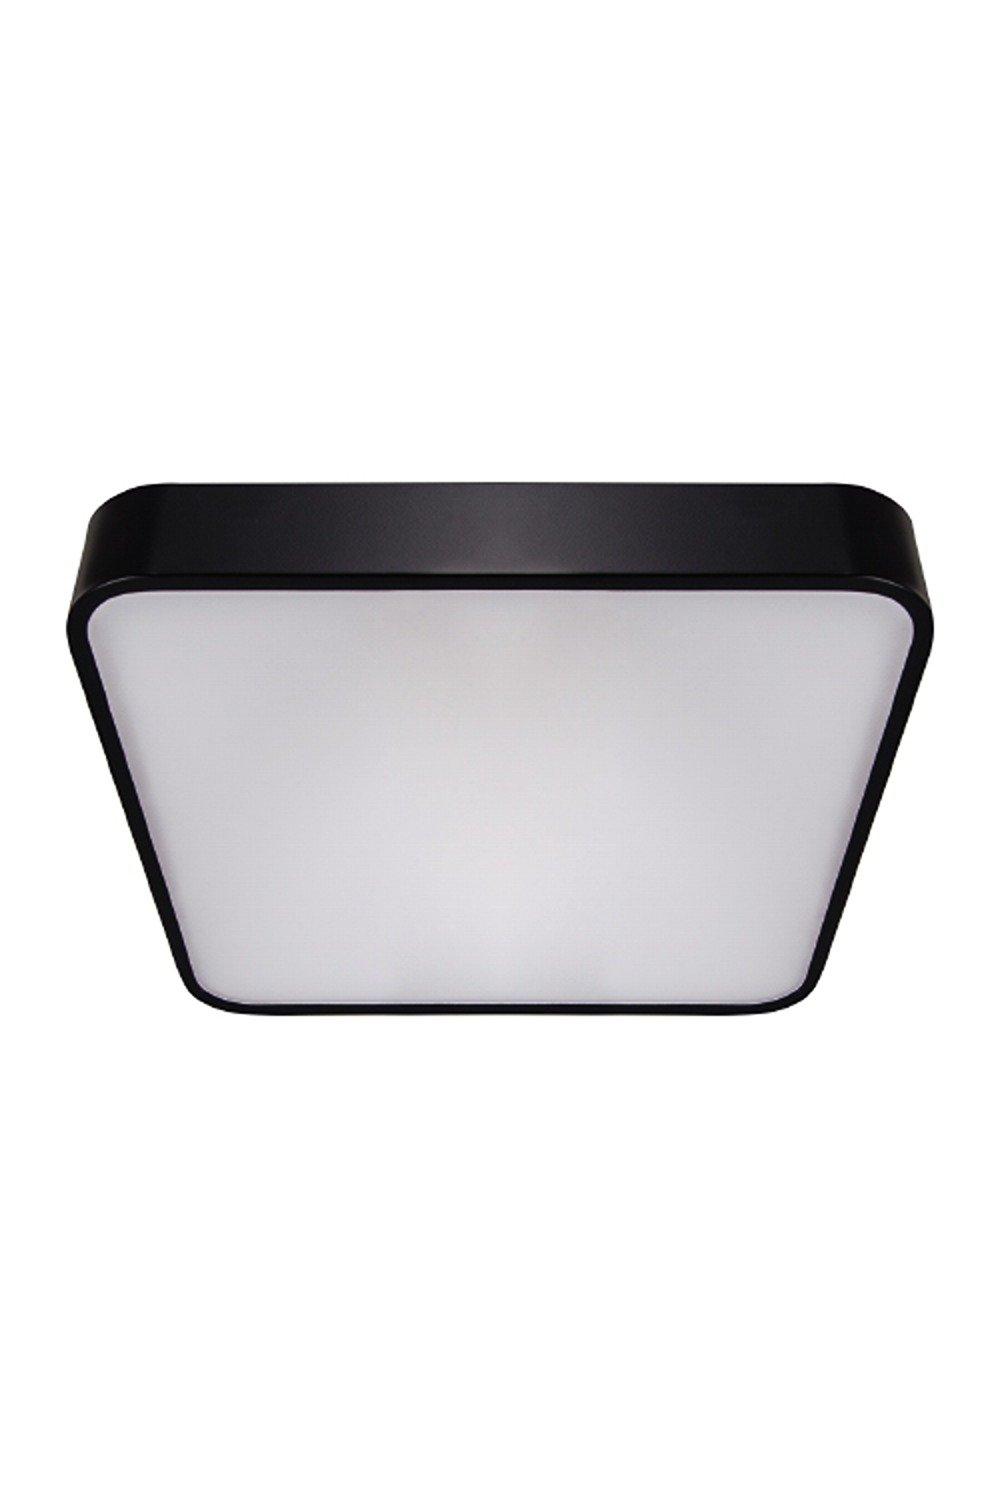 'Luna' Black Square Ceiling Wall Light Surface Mount 24W